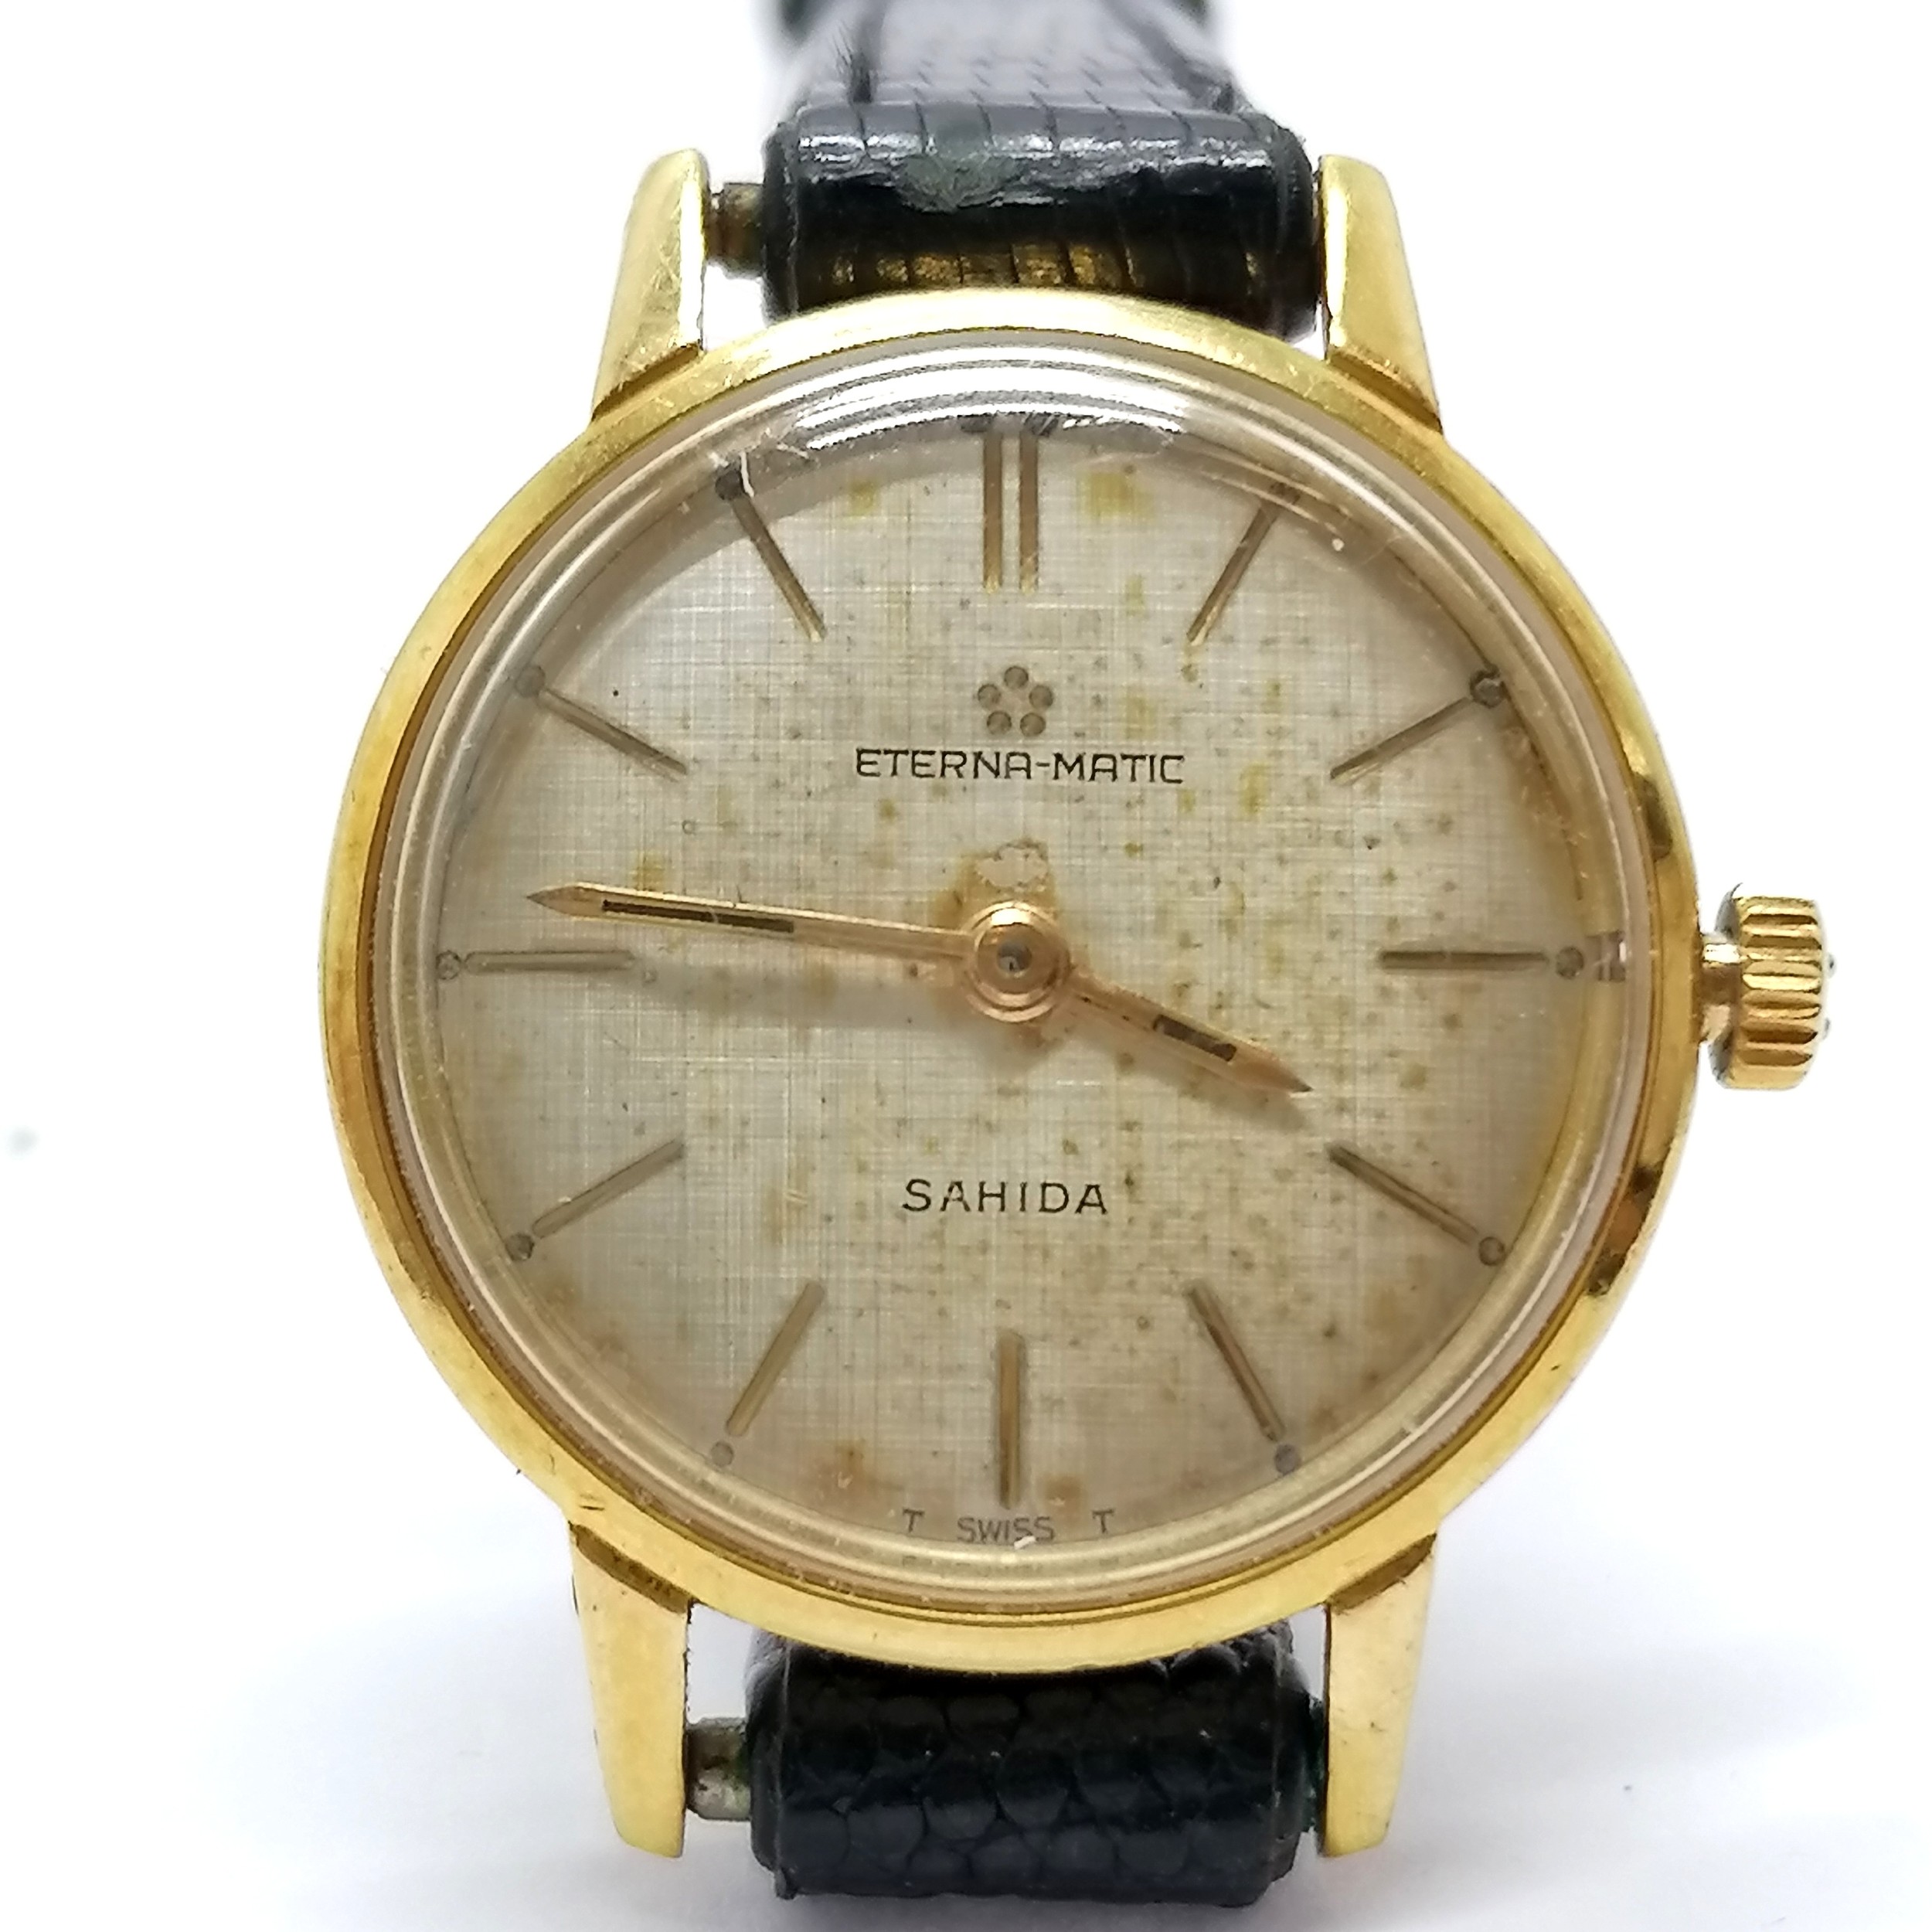 Eterna-matic Sahida automatic mid size 18ct gold wristwatch (22mm case) in original retail box - has - Image 5 of 5